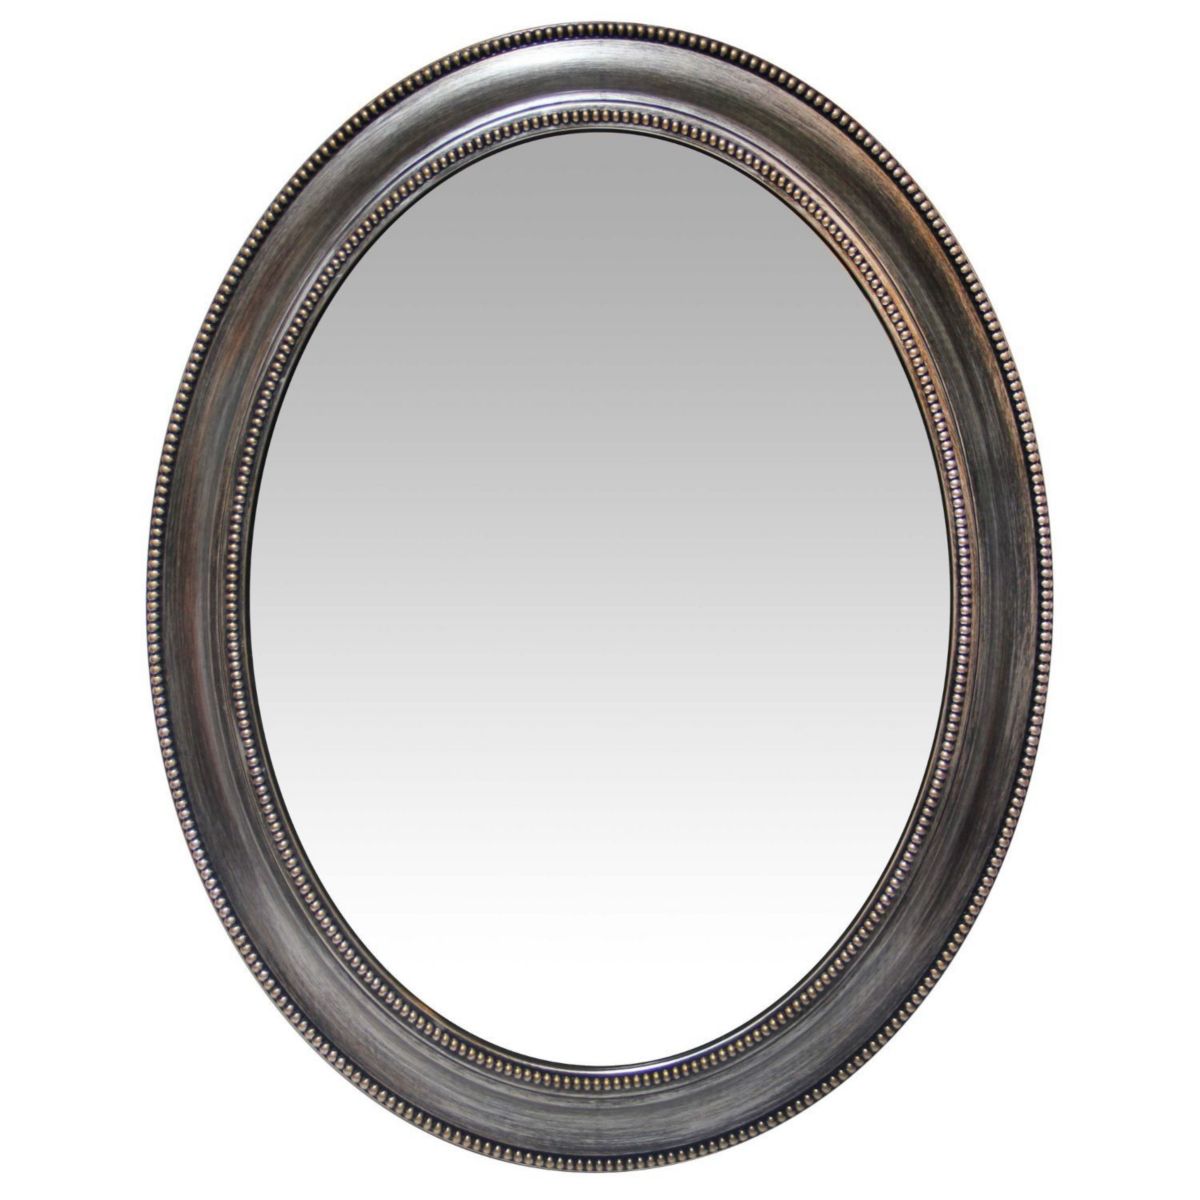 Infinity Instruments Sonore Oval Wall Mirror Infinity Instruments